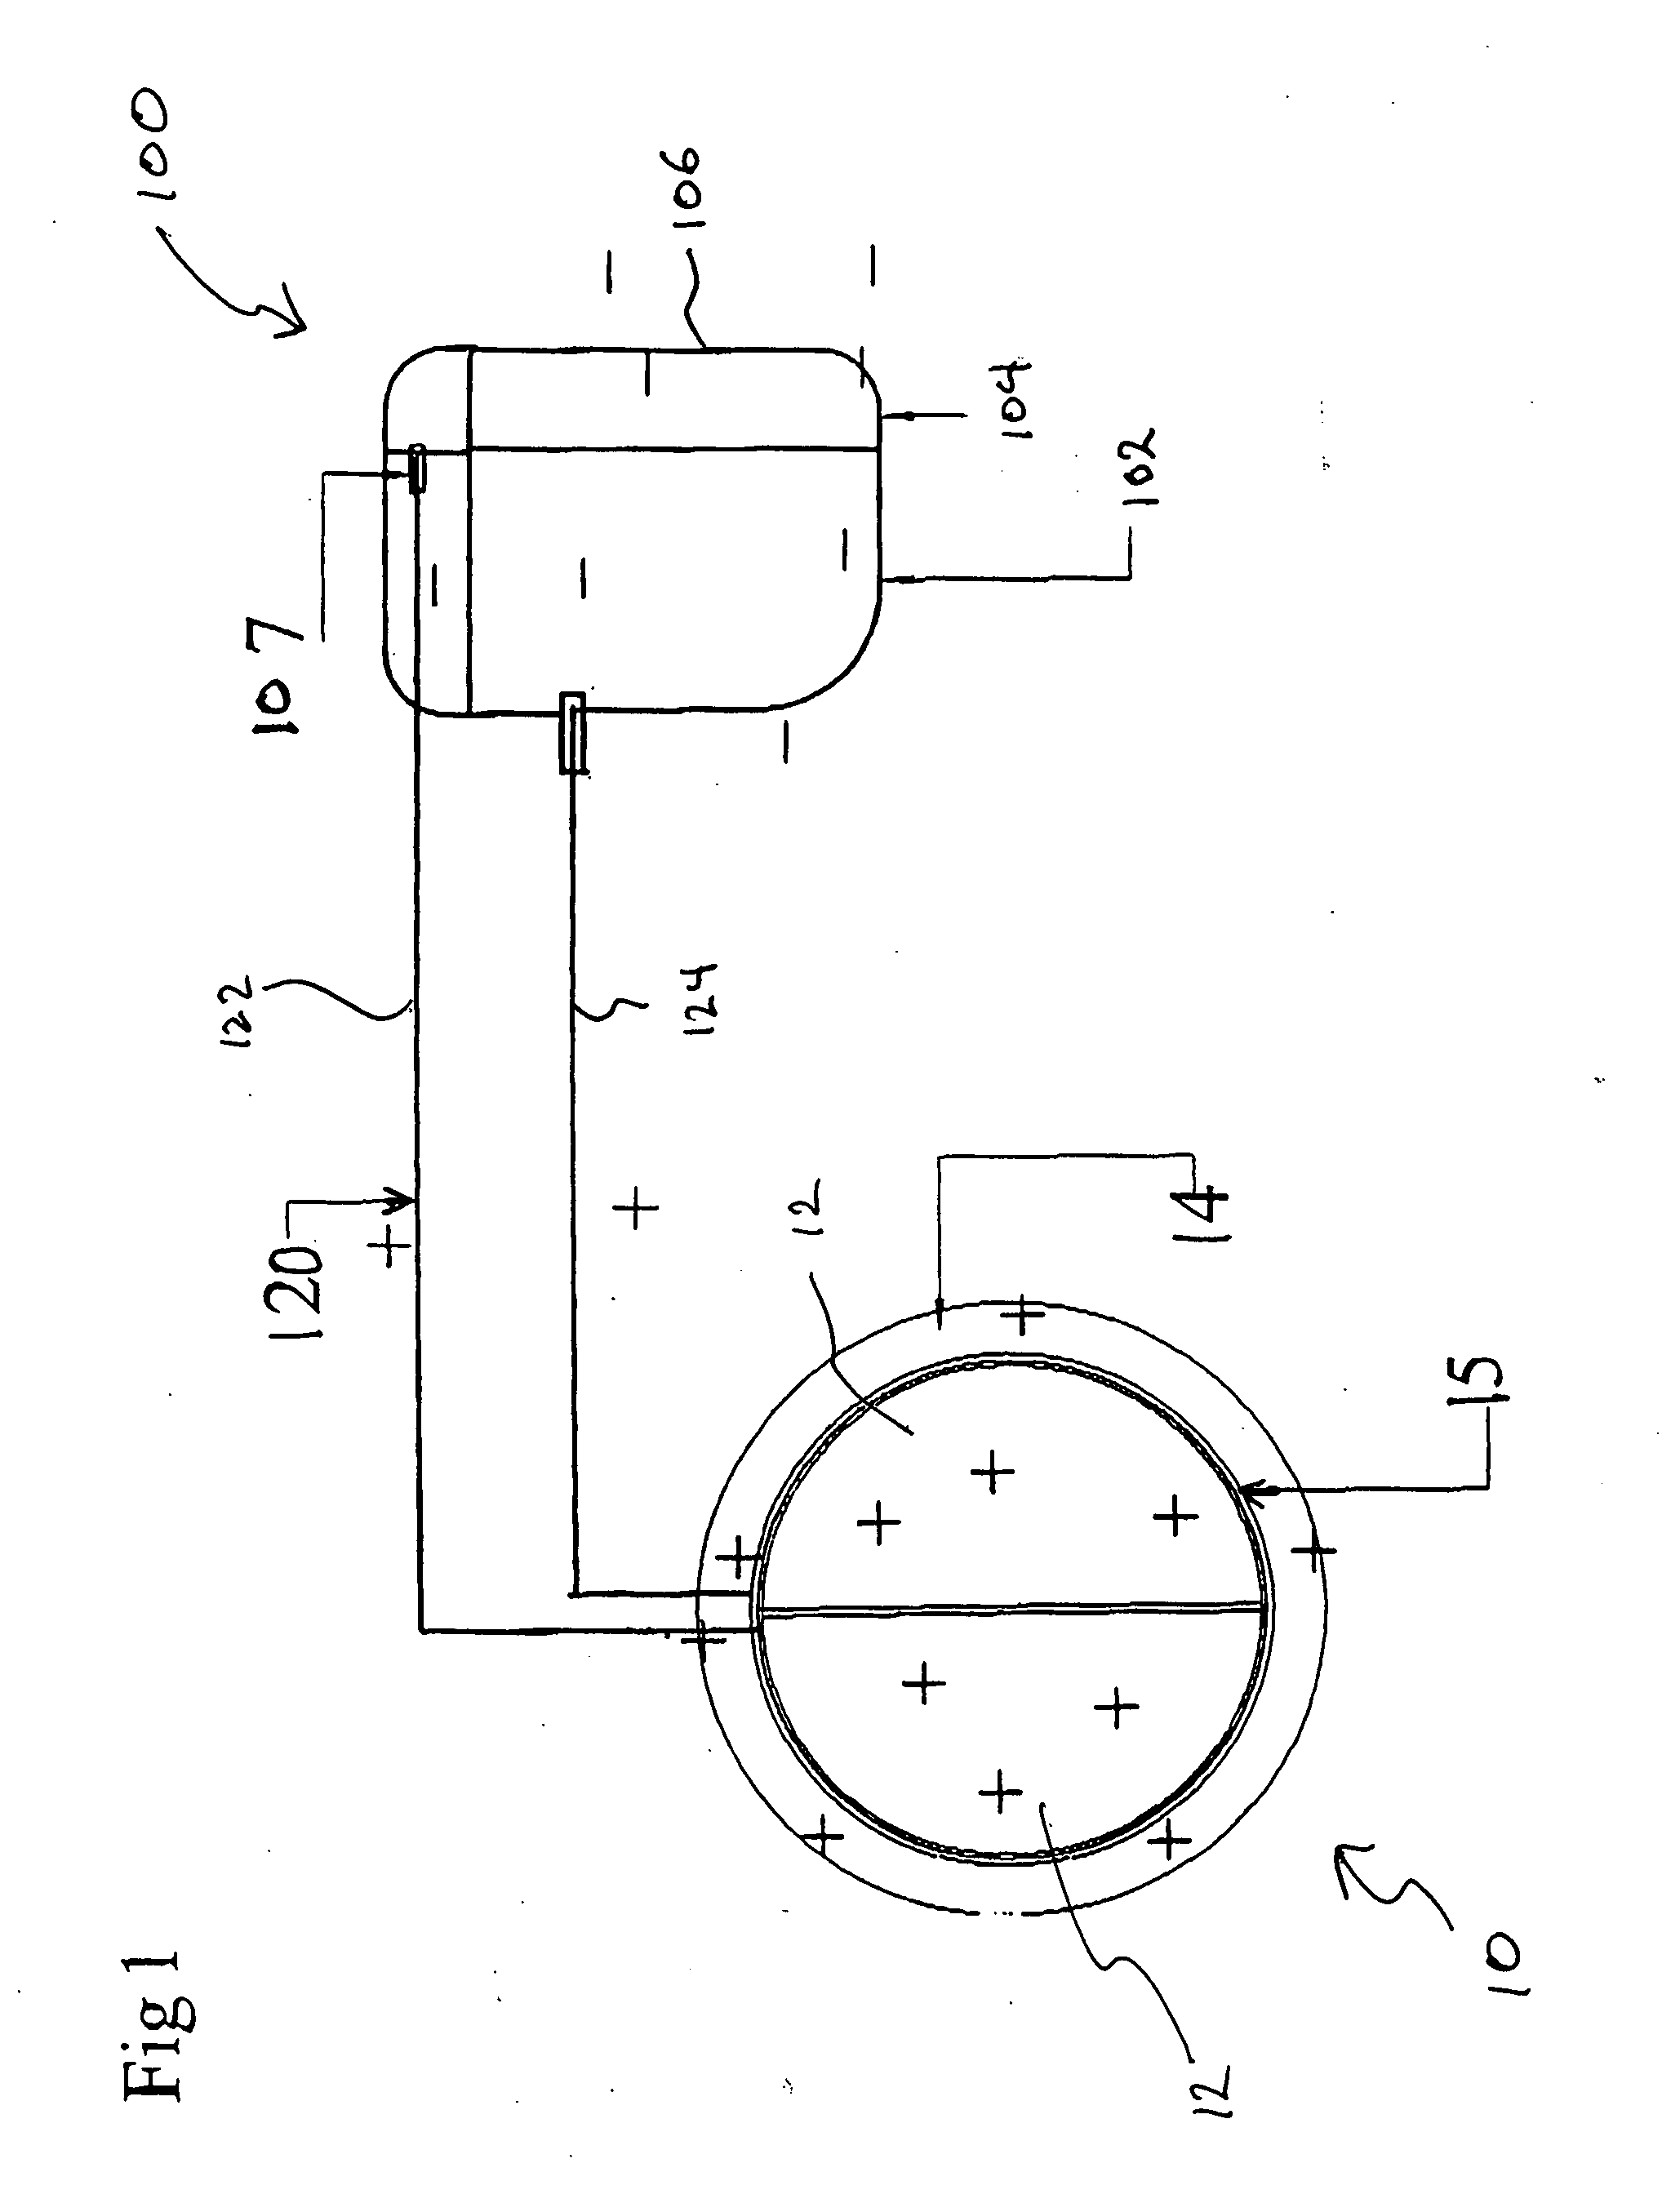 Method of rendering a mechanical heart valve non-thrombogenic with an electrical device